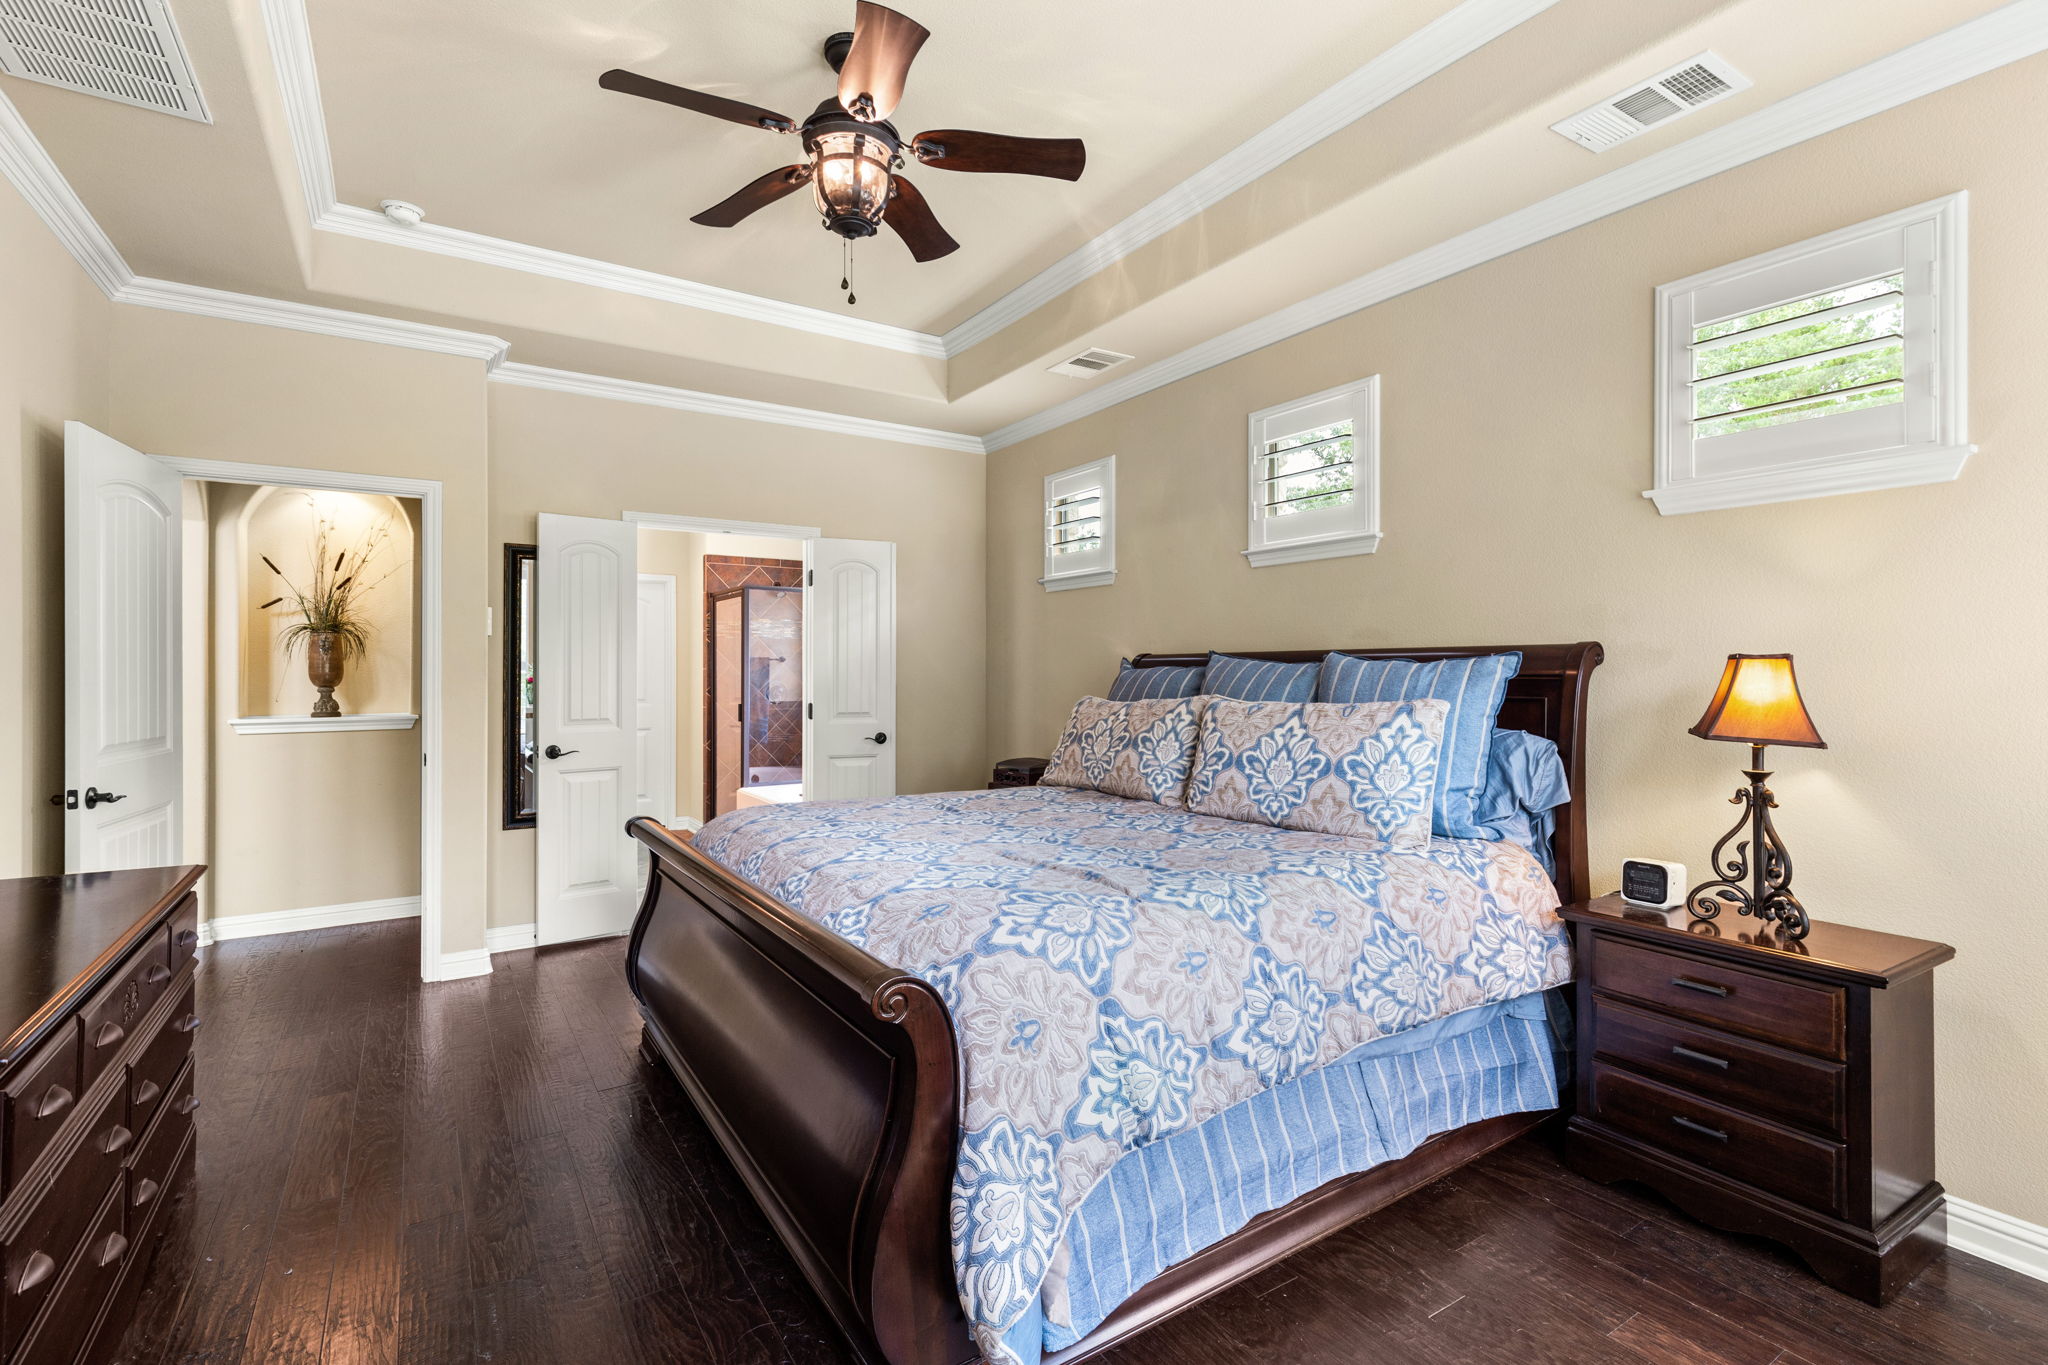 Tray ceilings and crown molding in primary suite